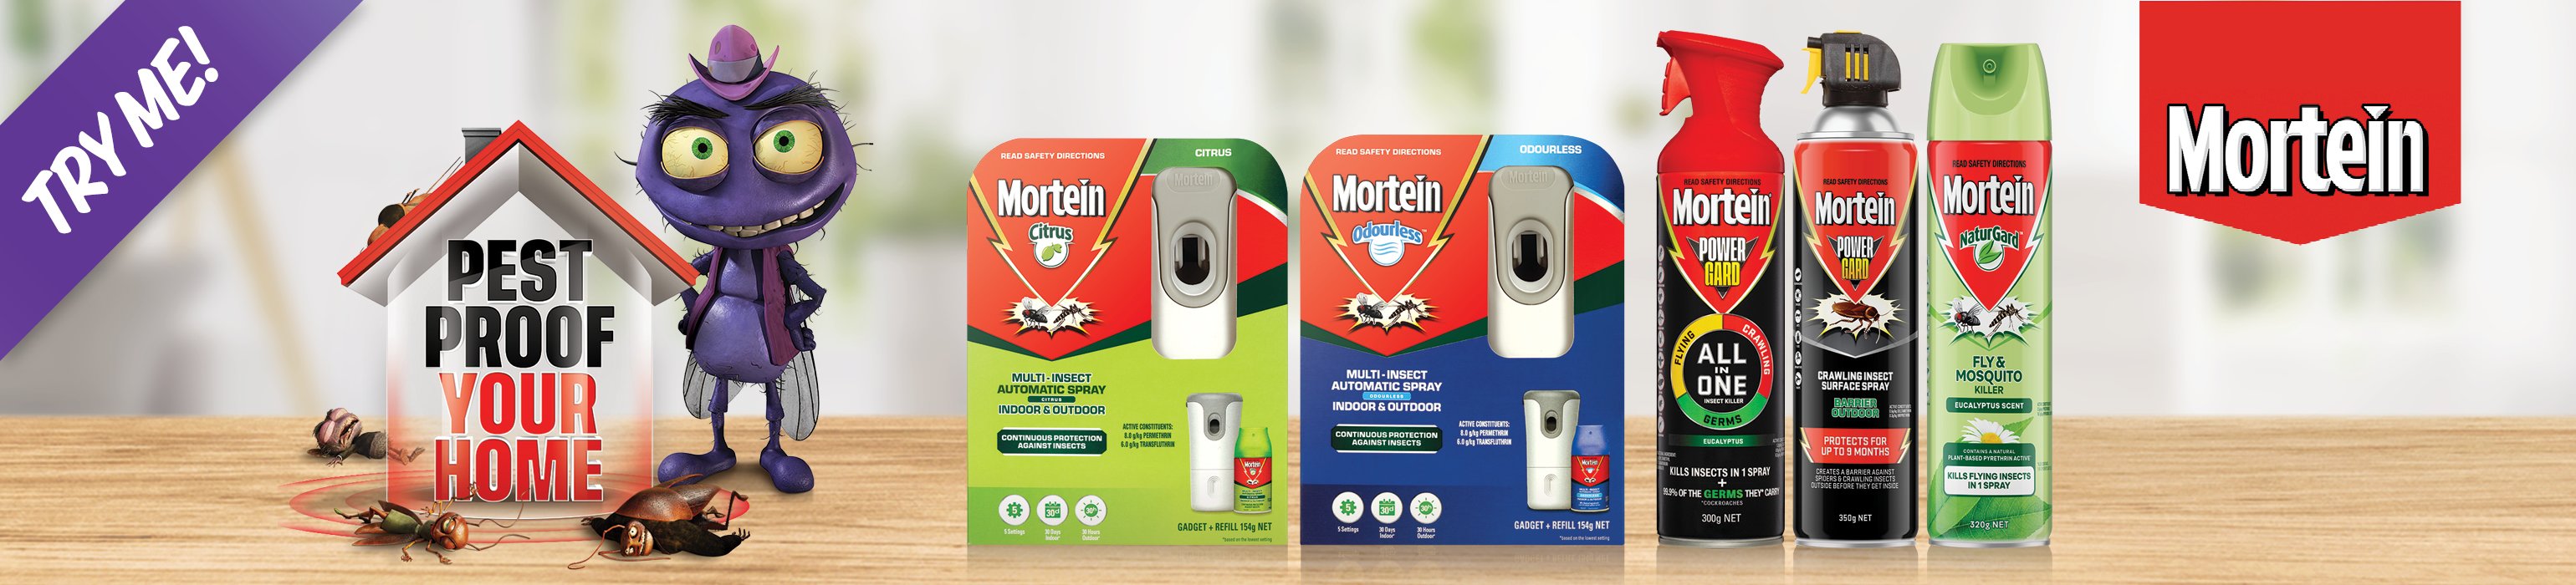 Pest control your home with Mortein